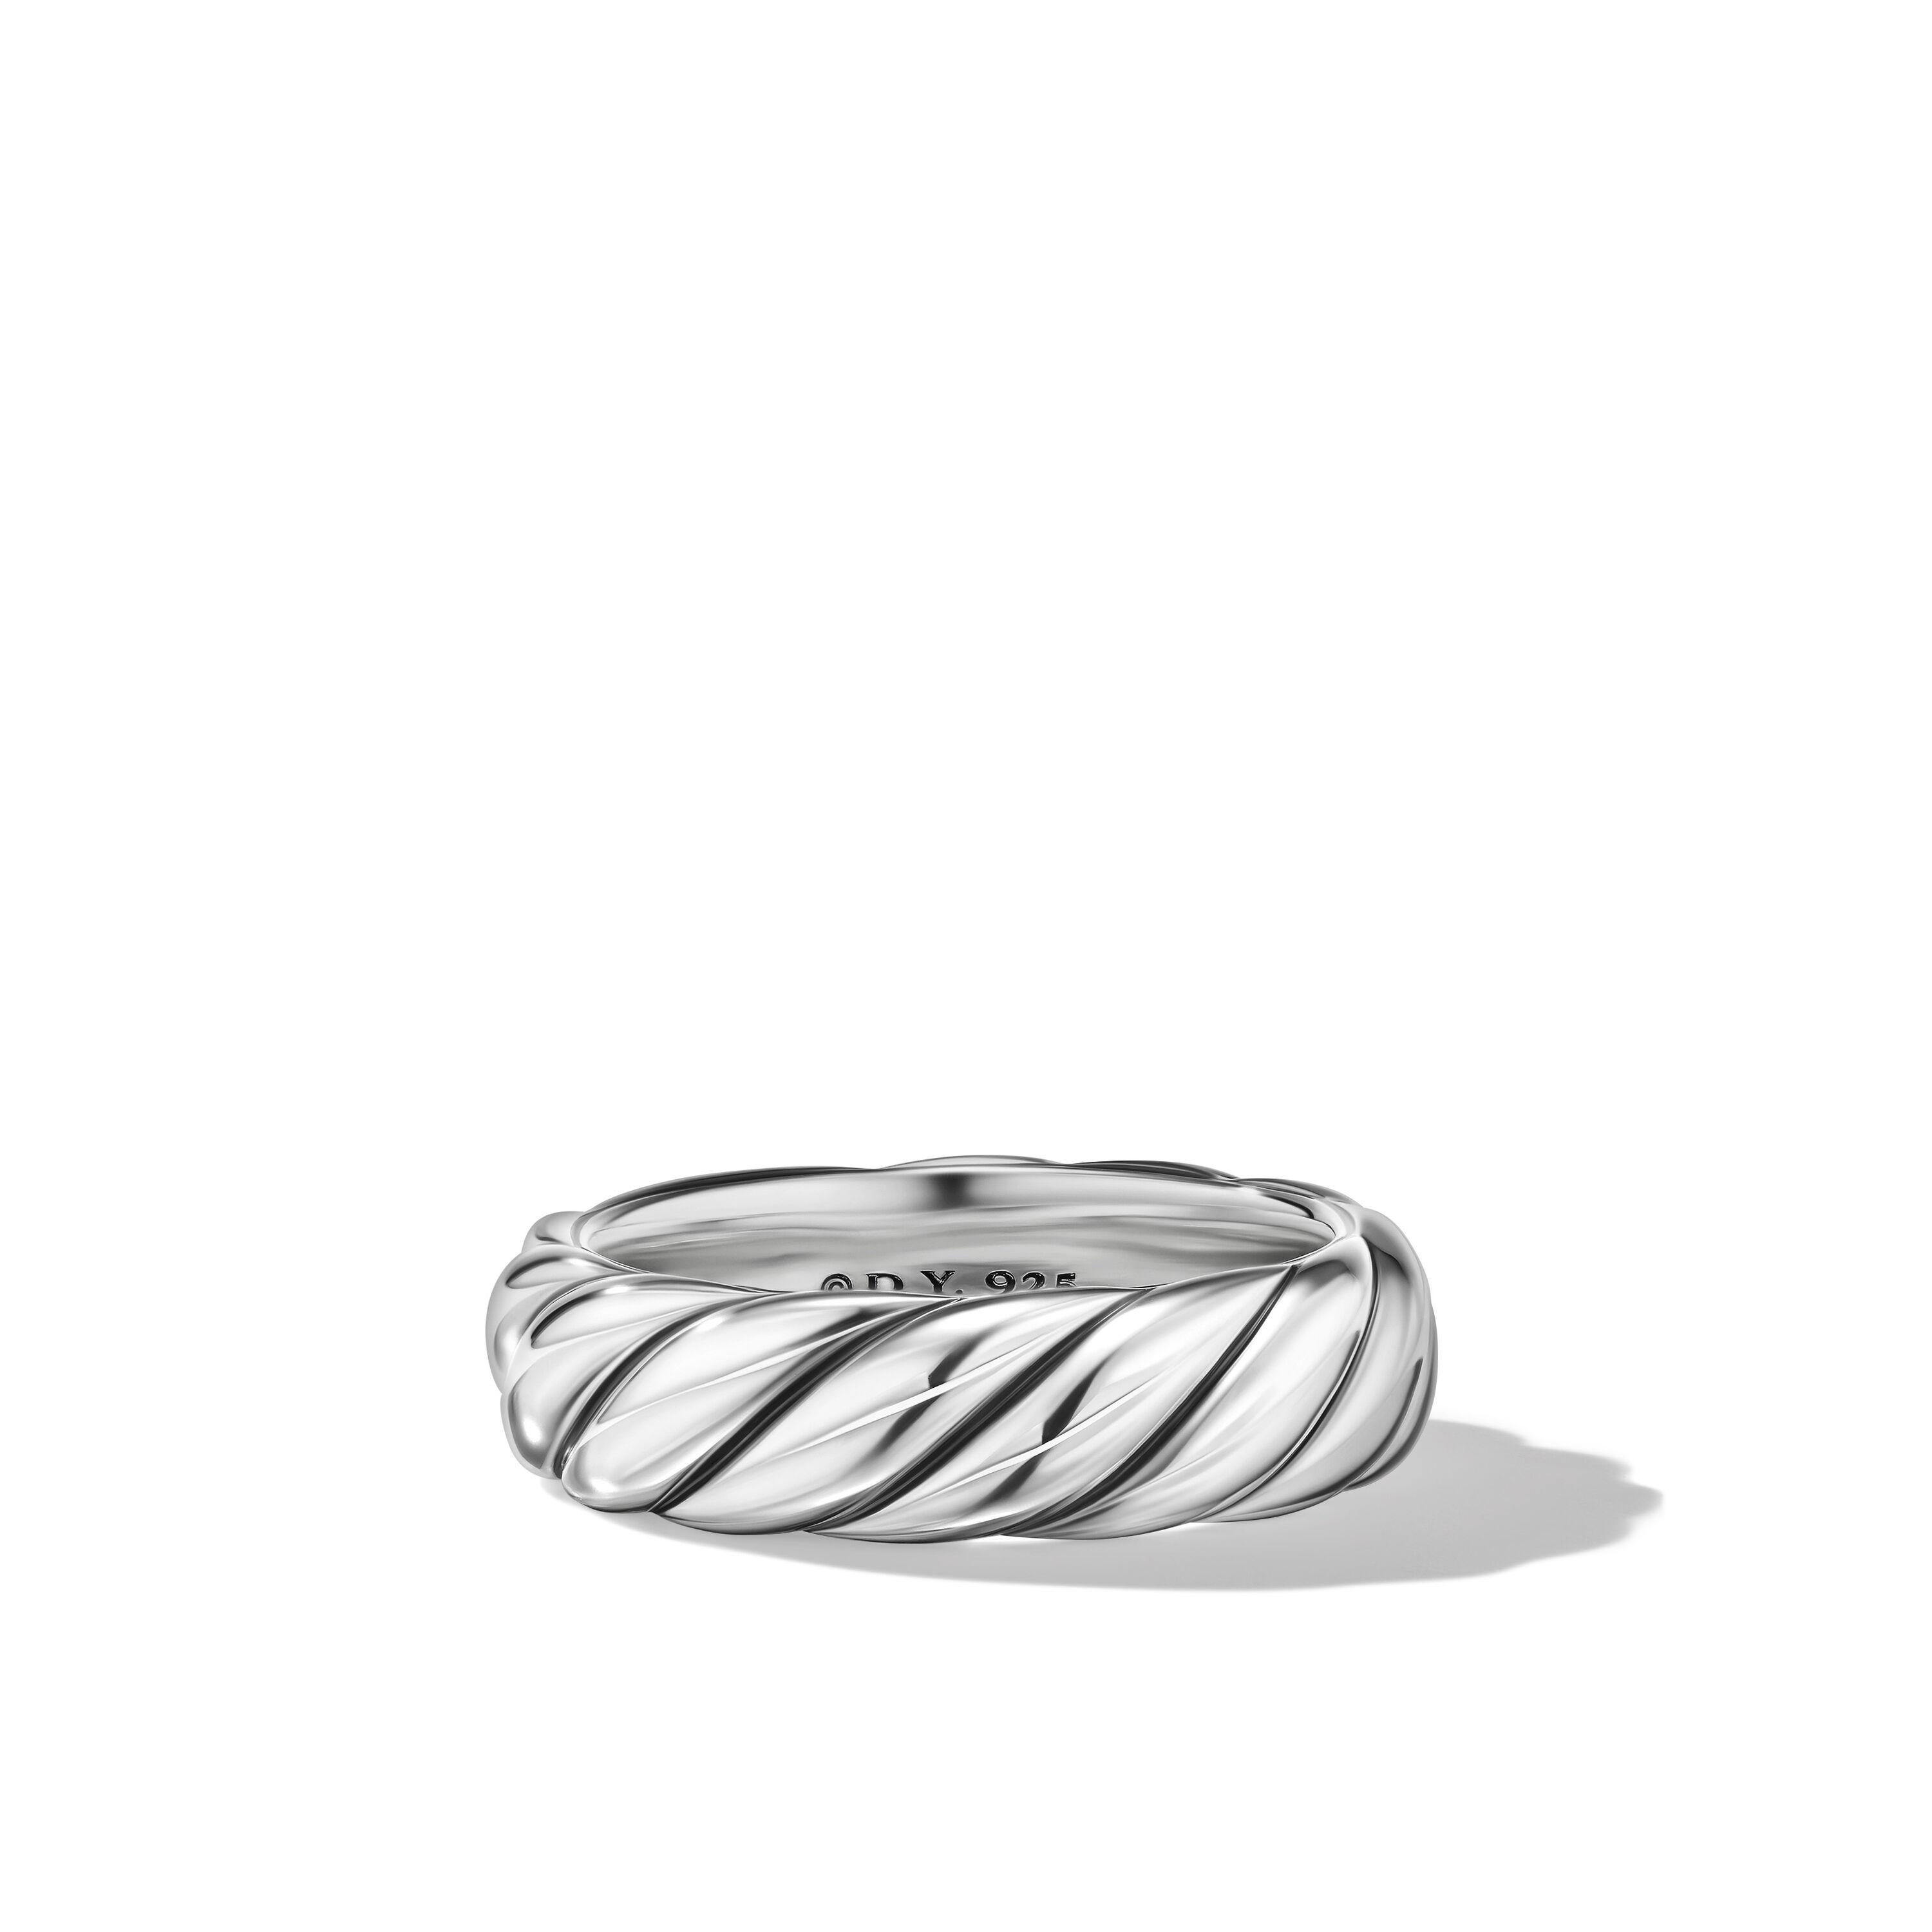 David Yurman Sculpted Cable 6mm Band in Sterling Silver, size 6